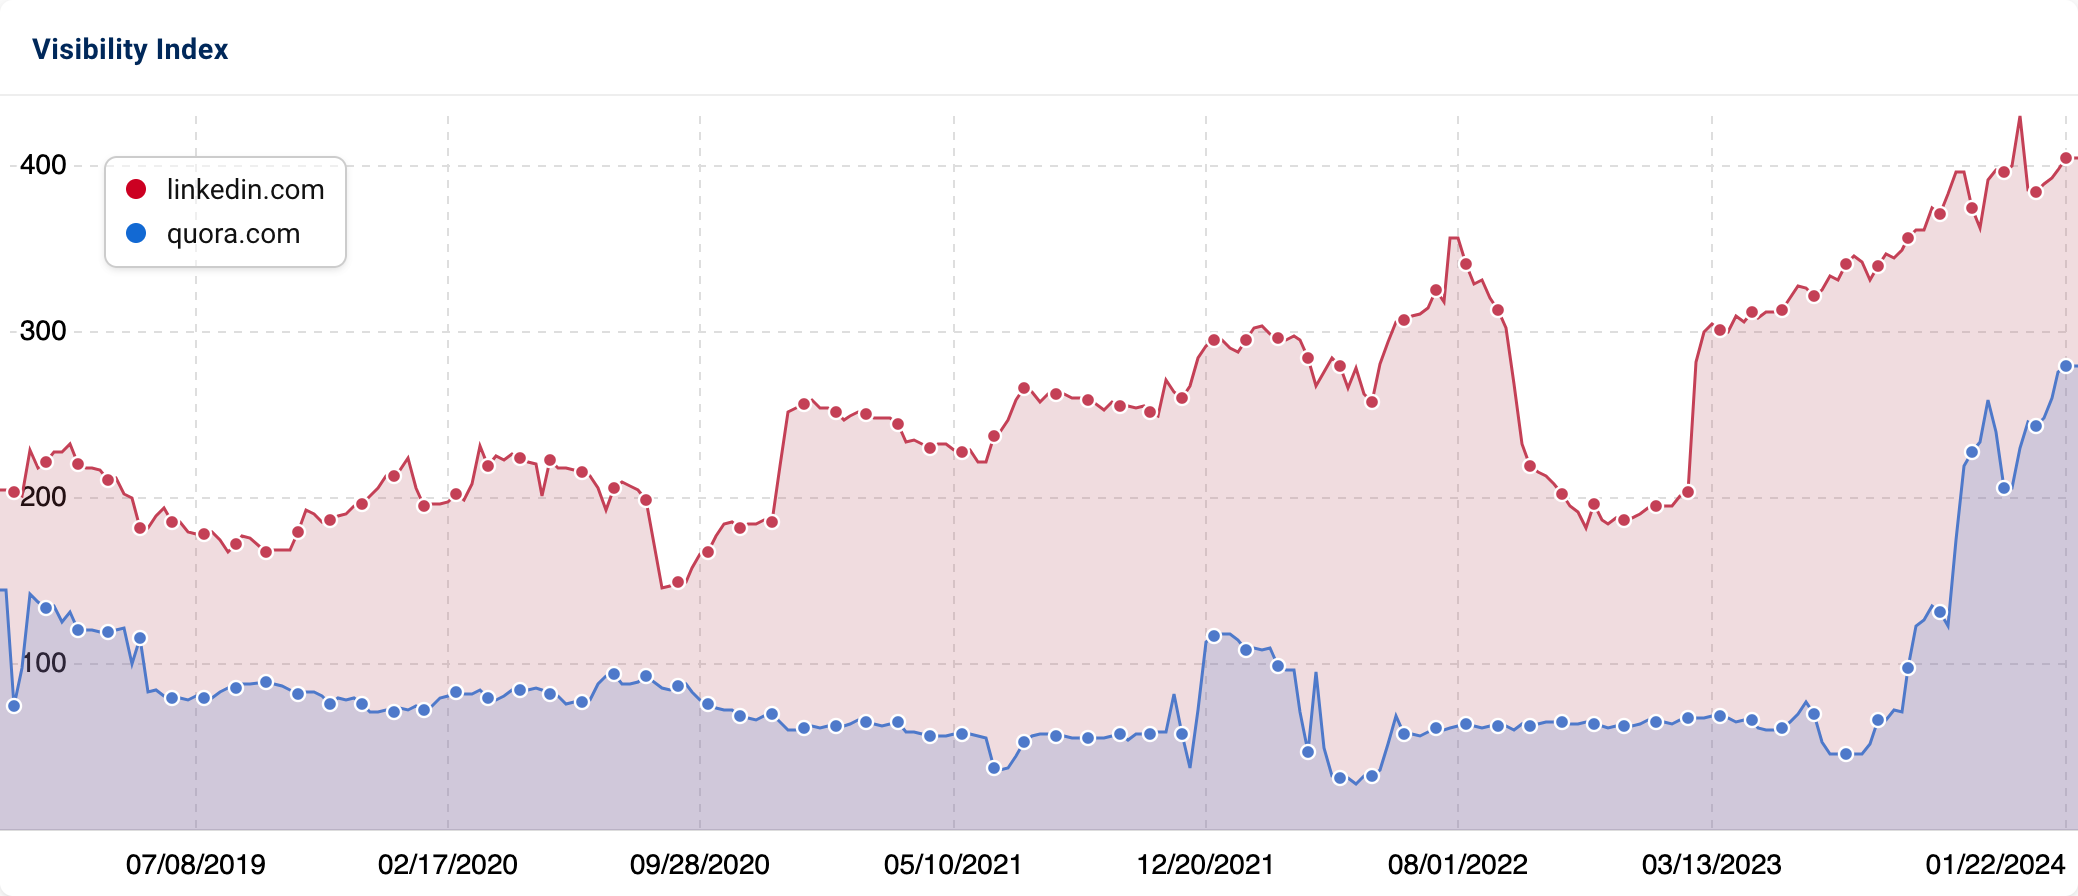 A comparison of the Visibility Index of linkedin.com and quora.com over the last 5 years.